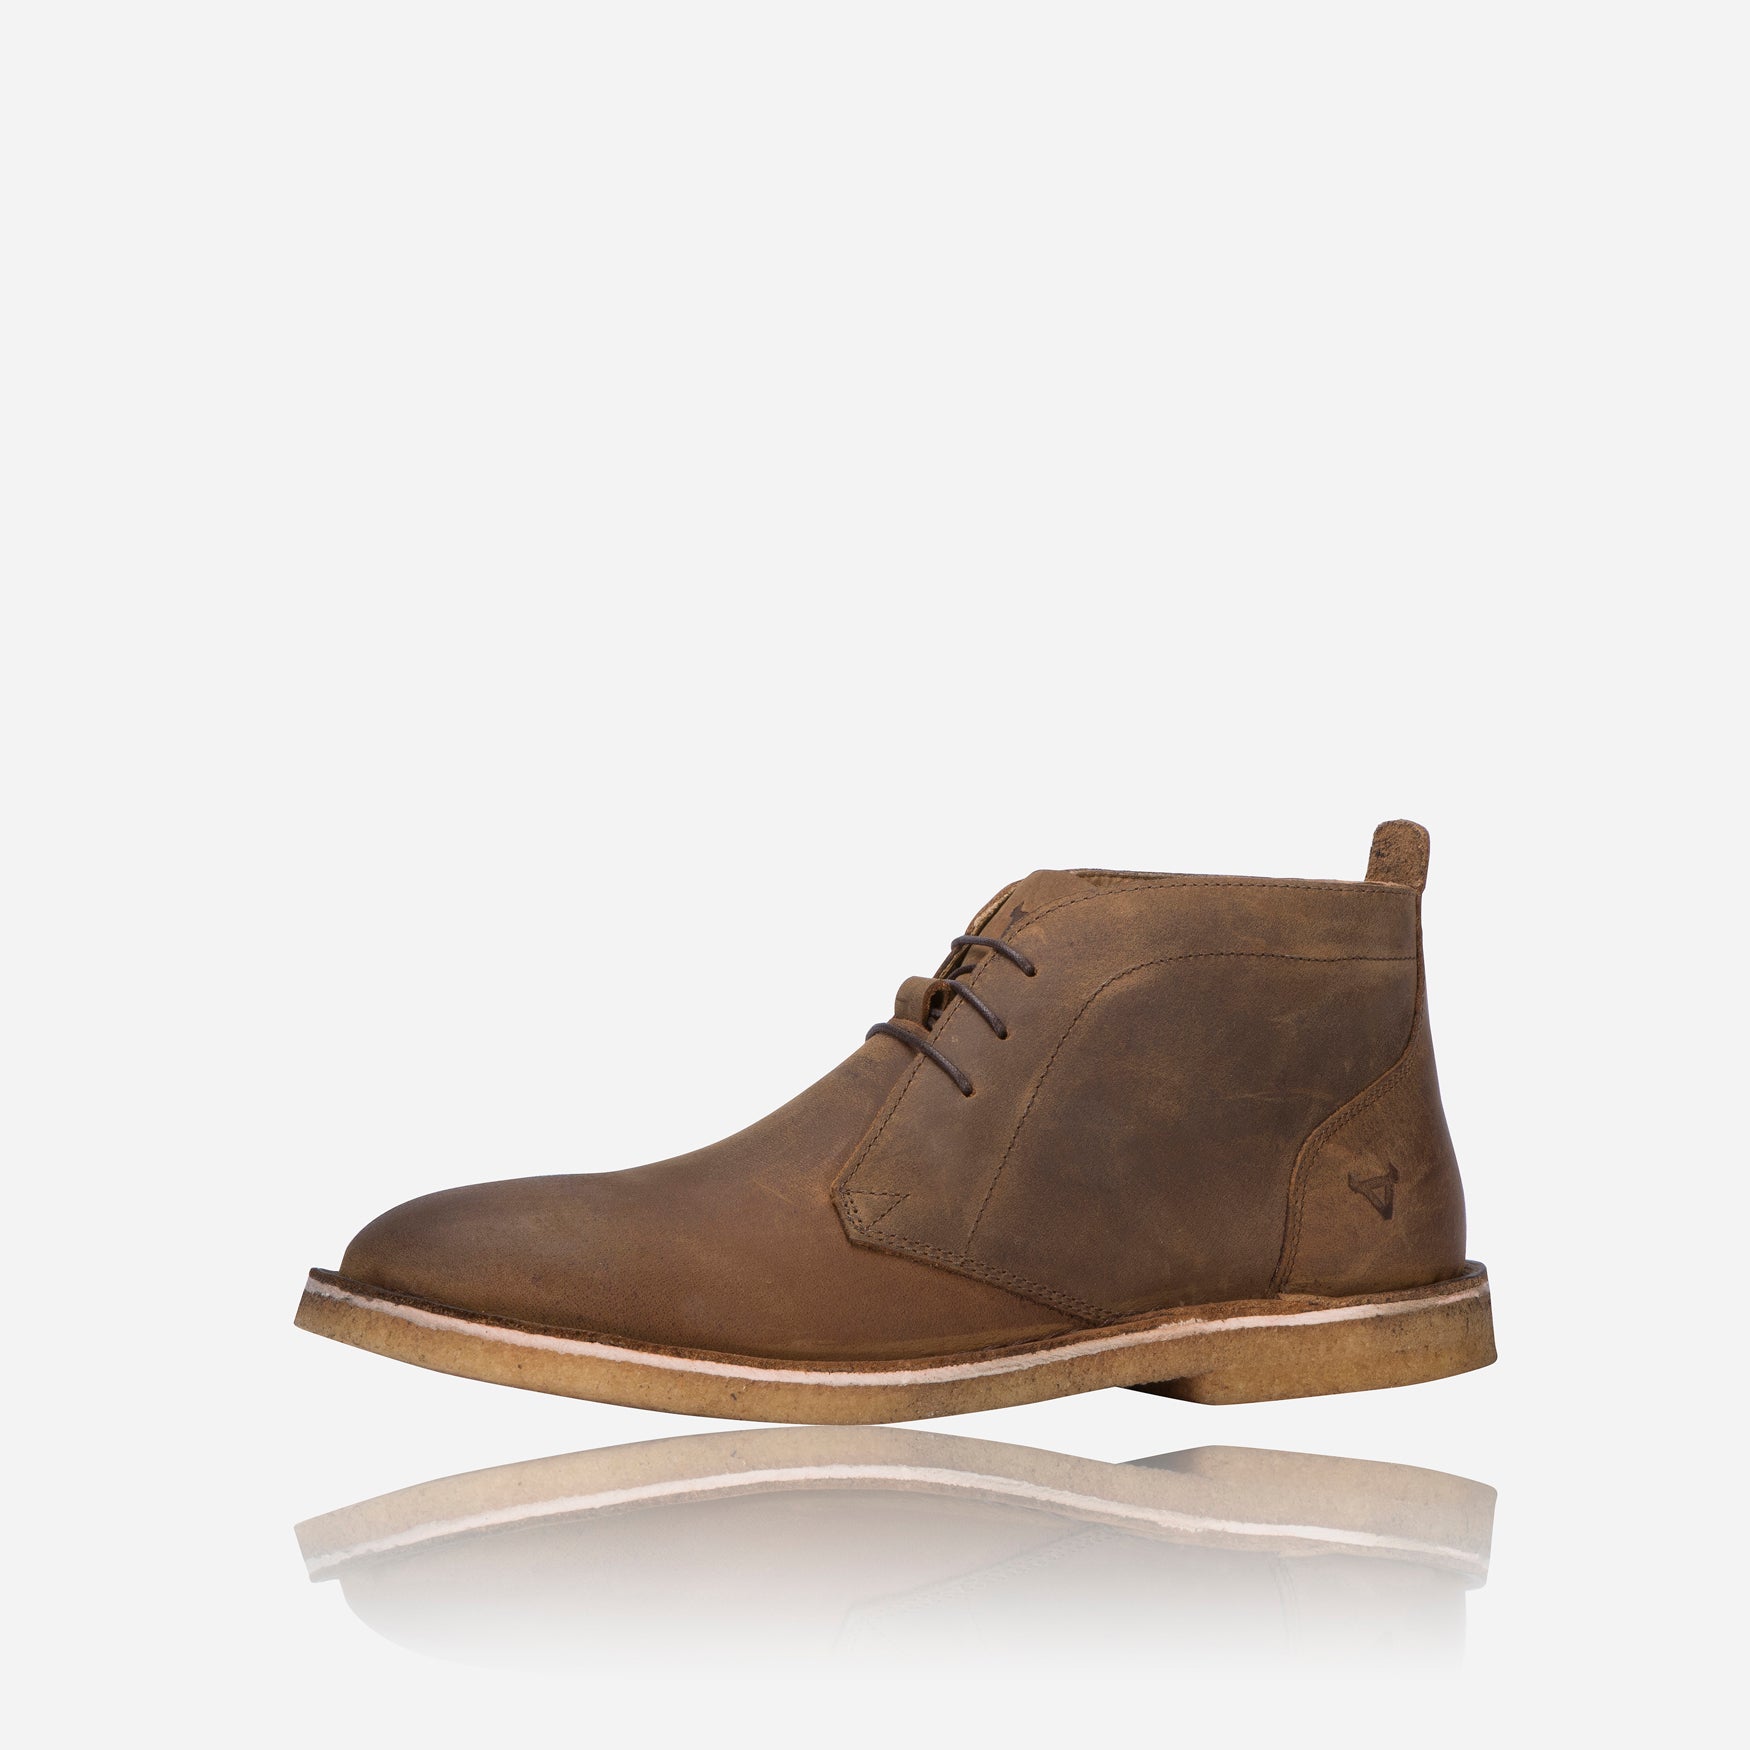 Wahlberg Vellie, Brown - Leather Shoes | Brando Leather South Africa